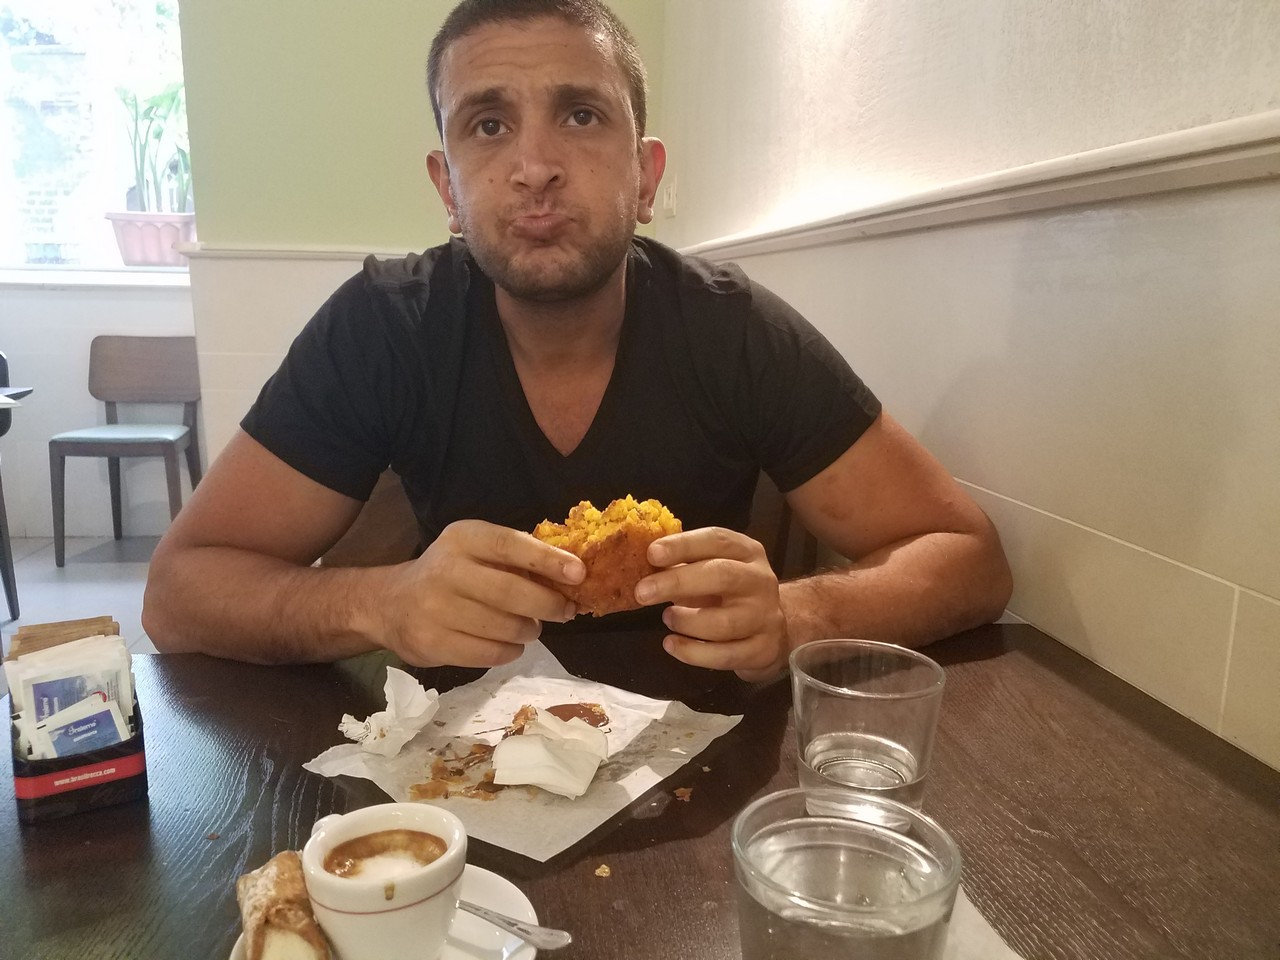 a man sitting at a table eating a sandwich